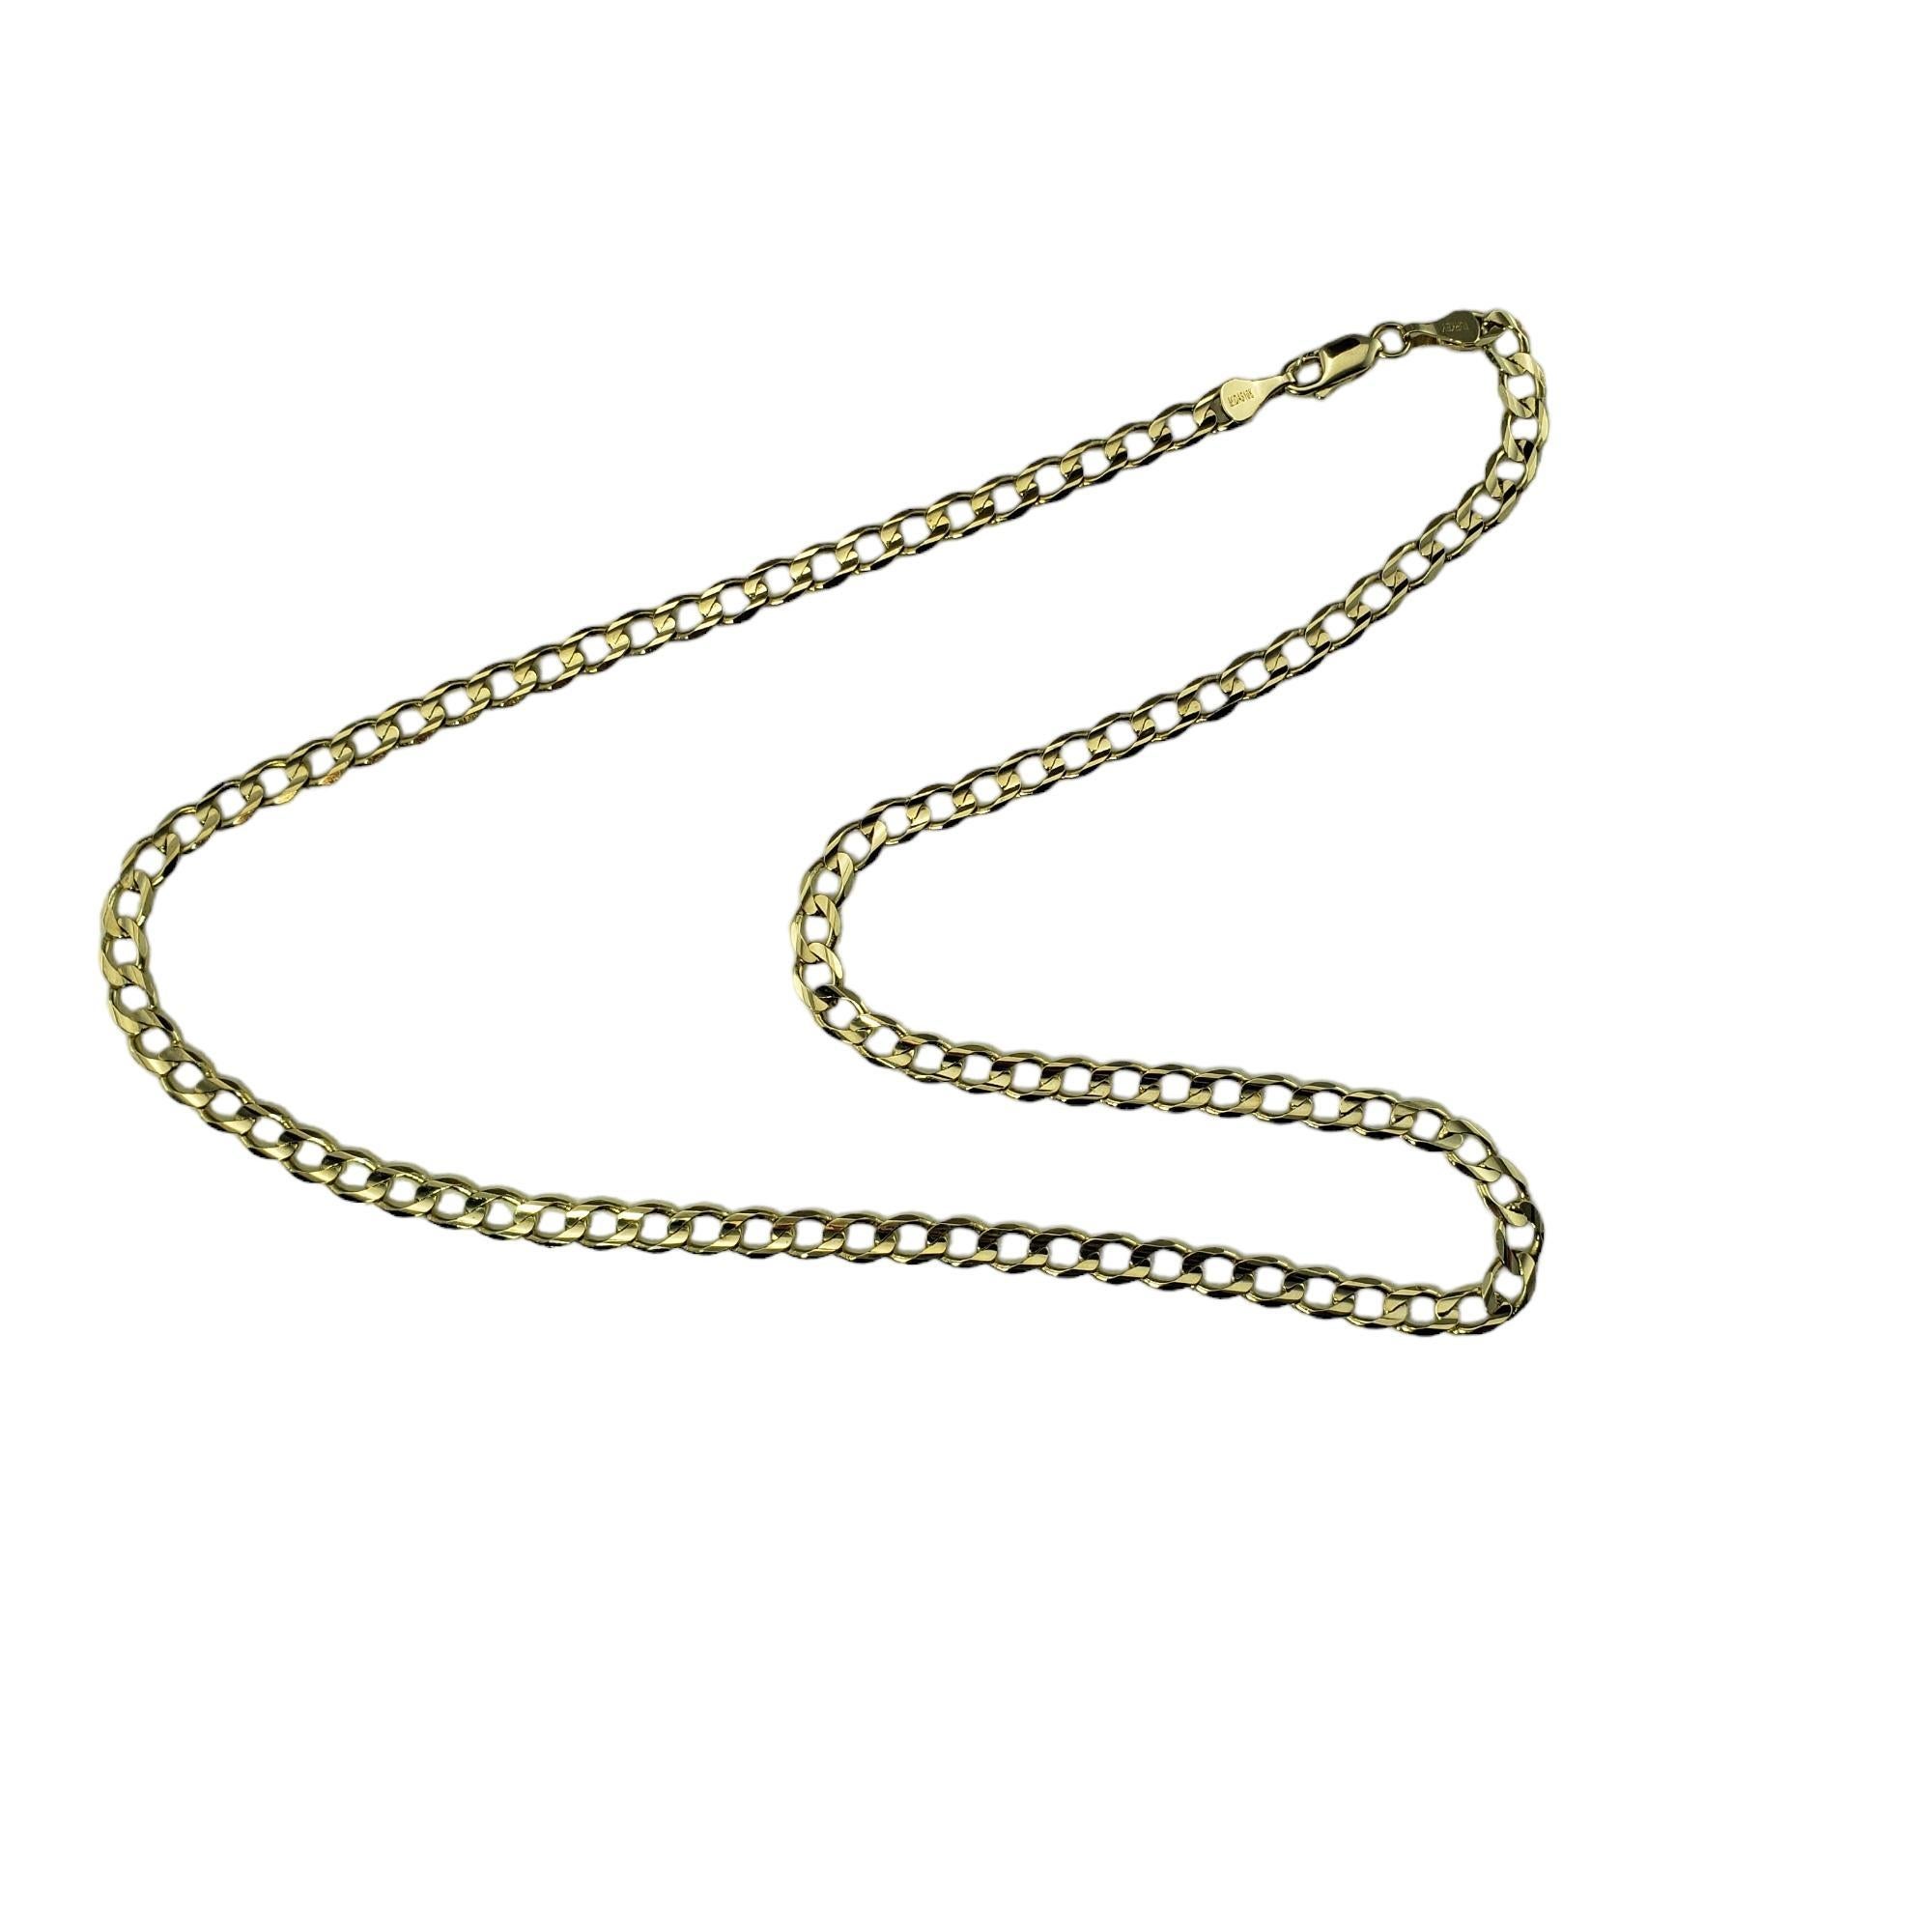 Vintage 10 Karat Yellow Gold Curb Chain Necklace #15329 In Good Condition For Sale In Washington Depot, CT